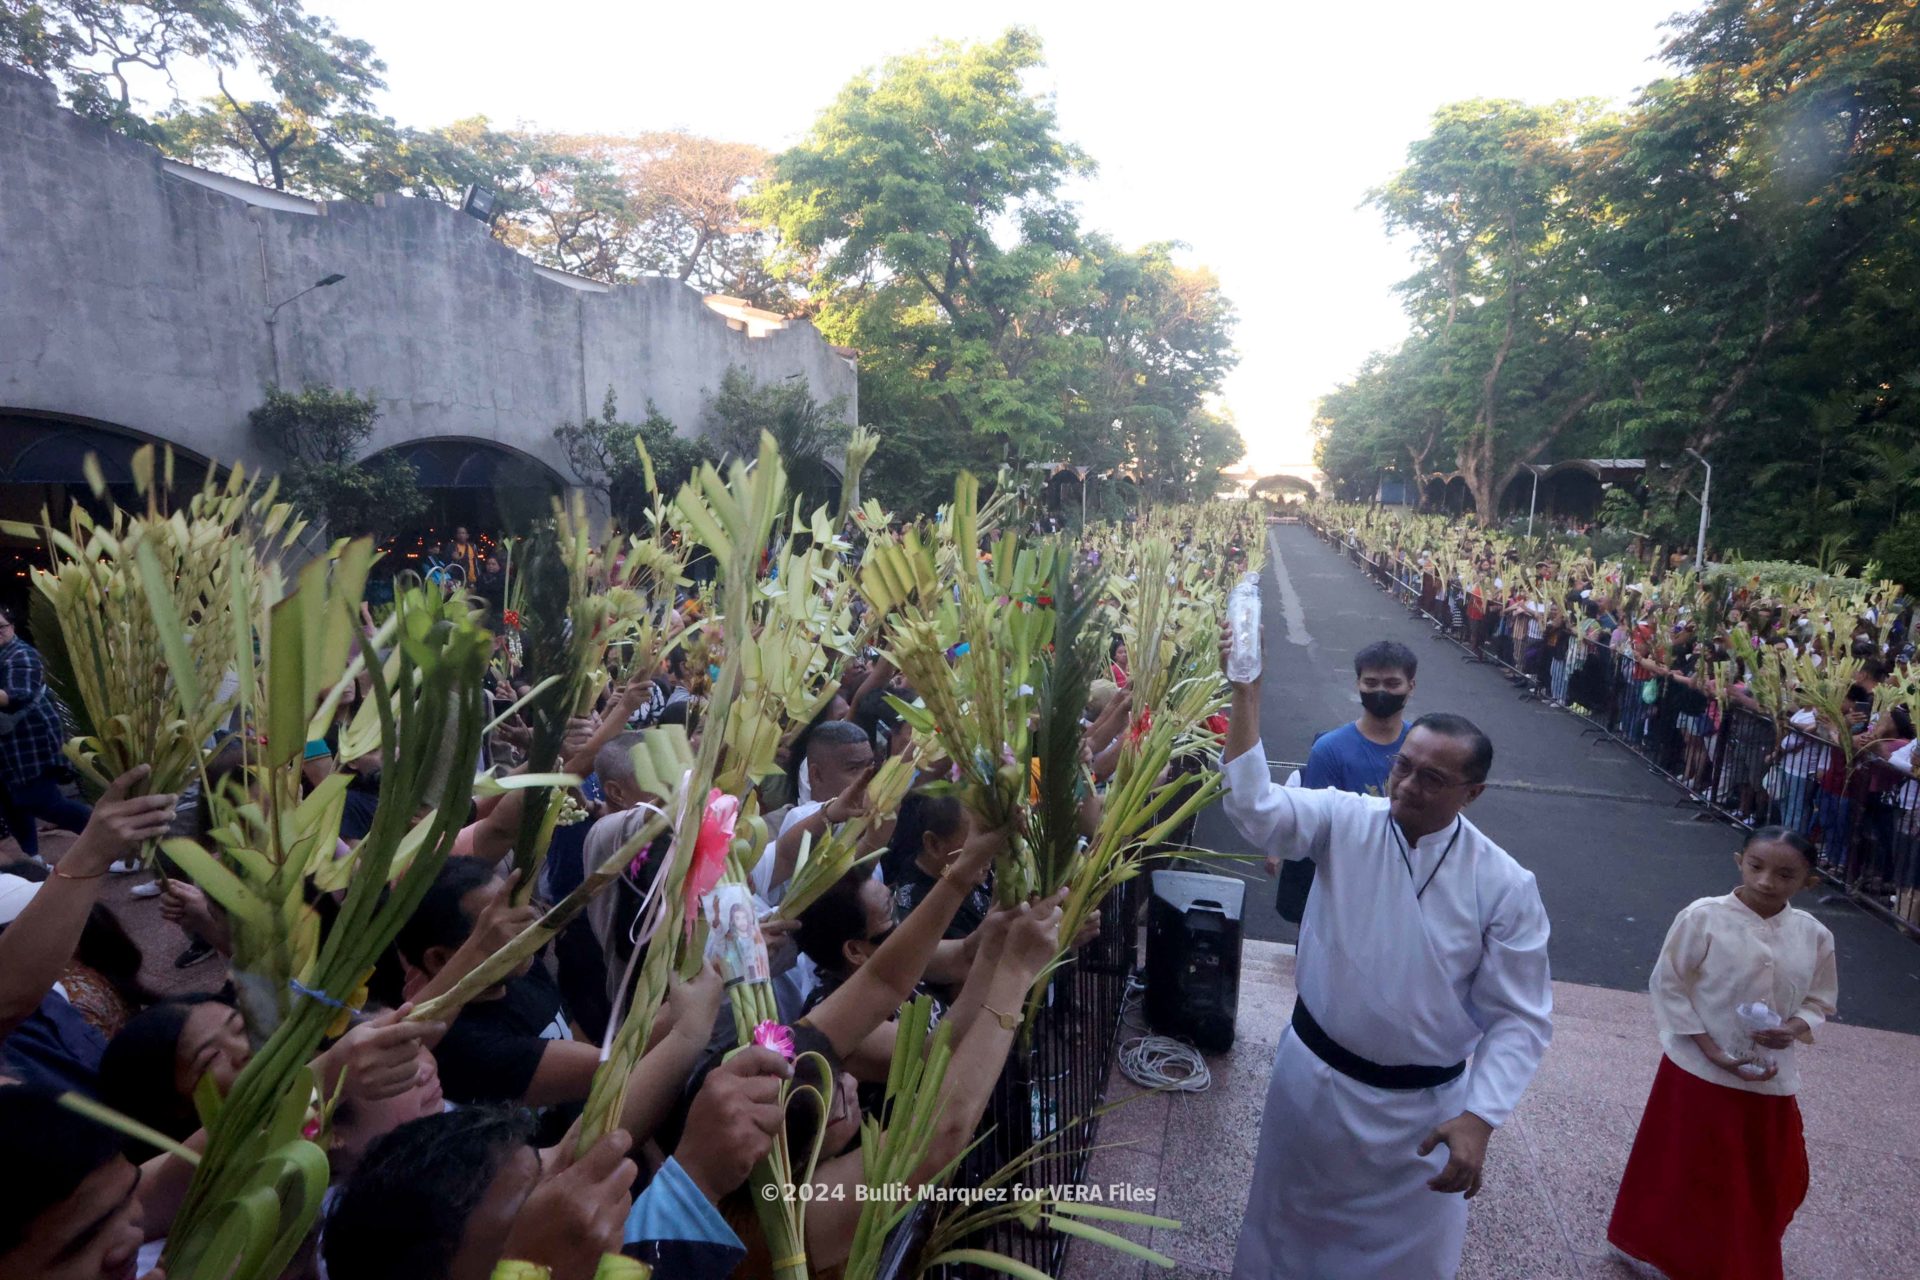 Colorful Palm Sunday marks the concluding week of Lent 11/18 Photo by Bullit Marquez for VERA Files